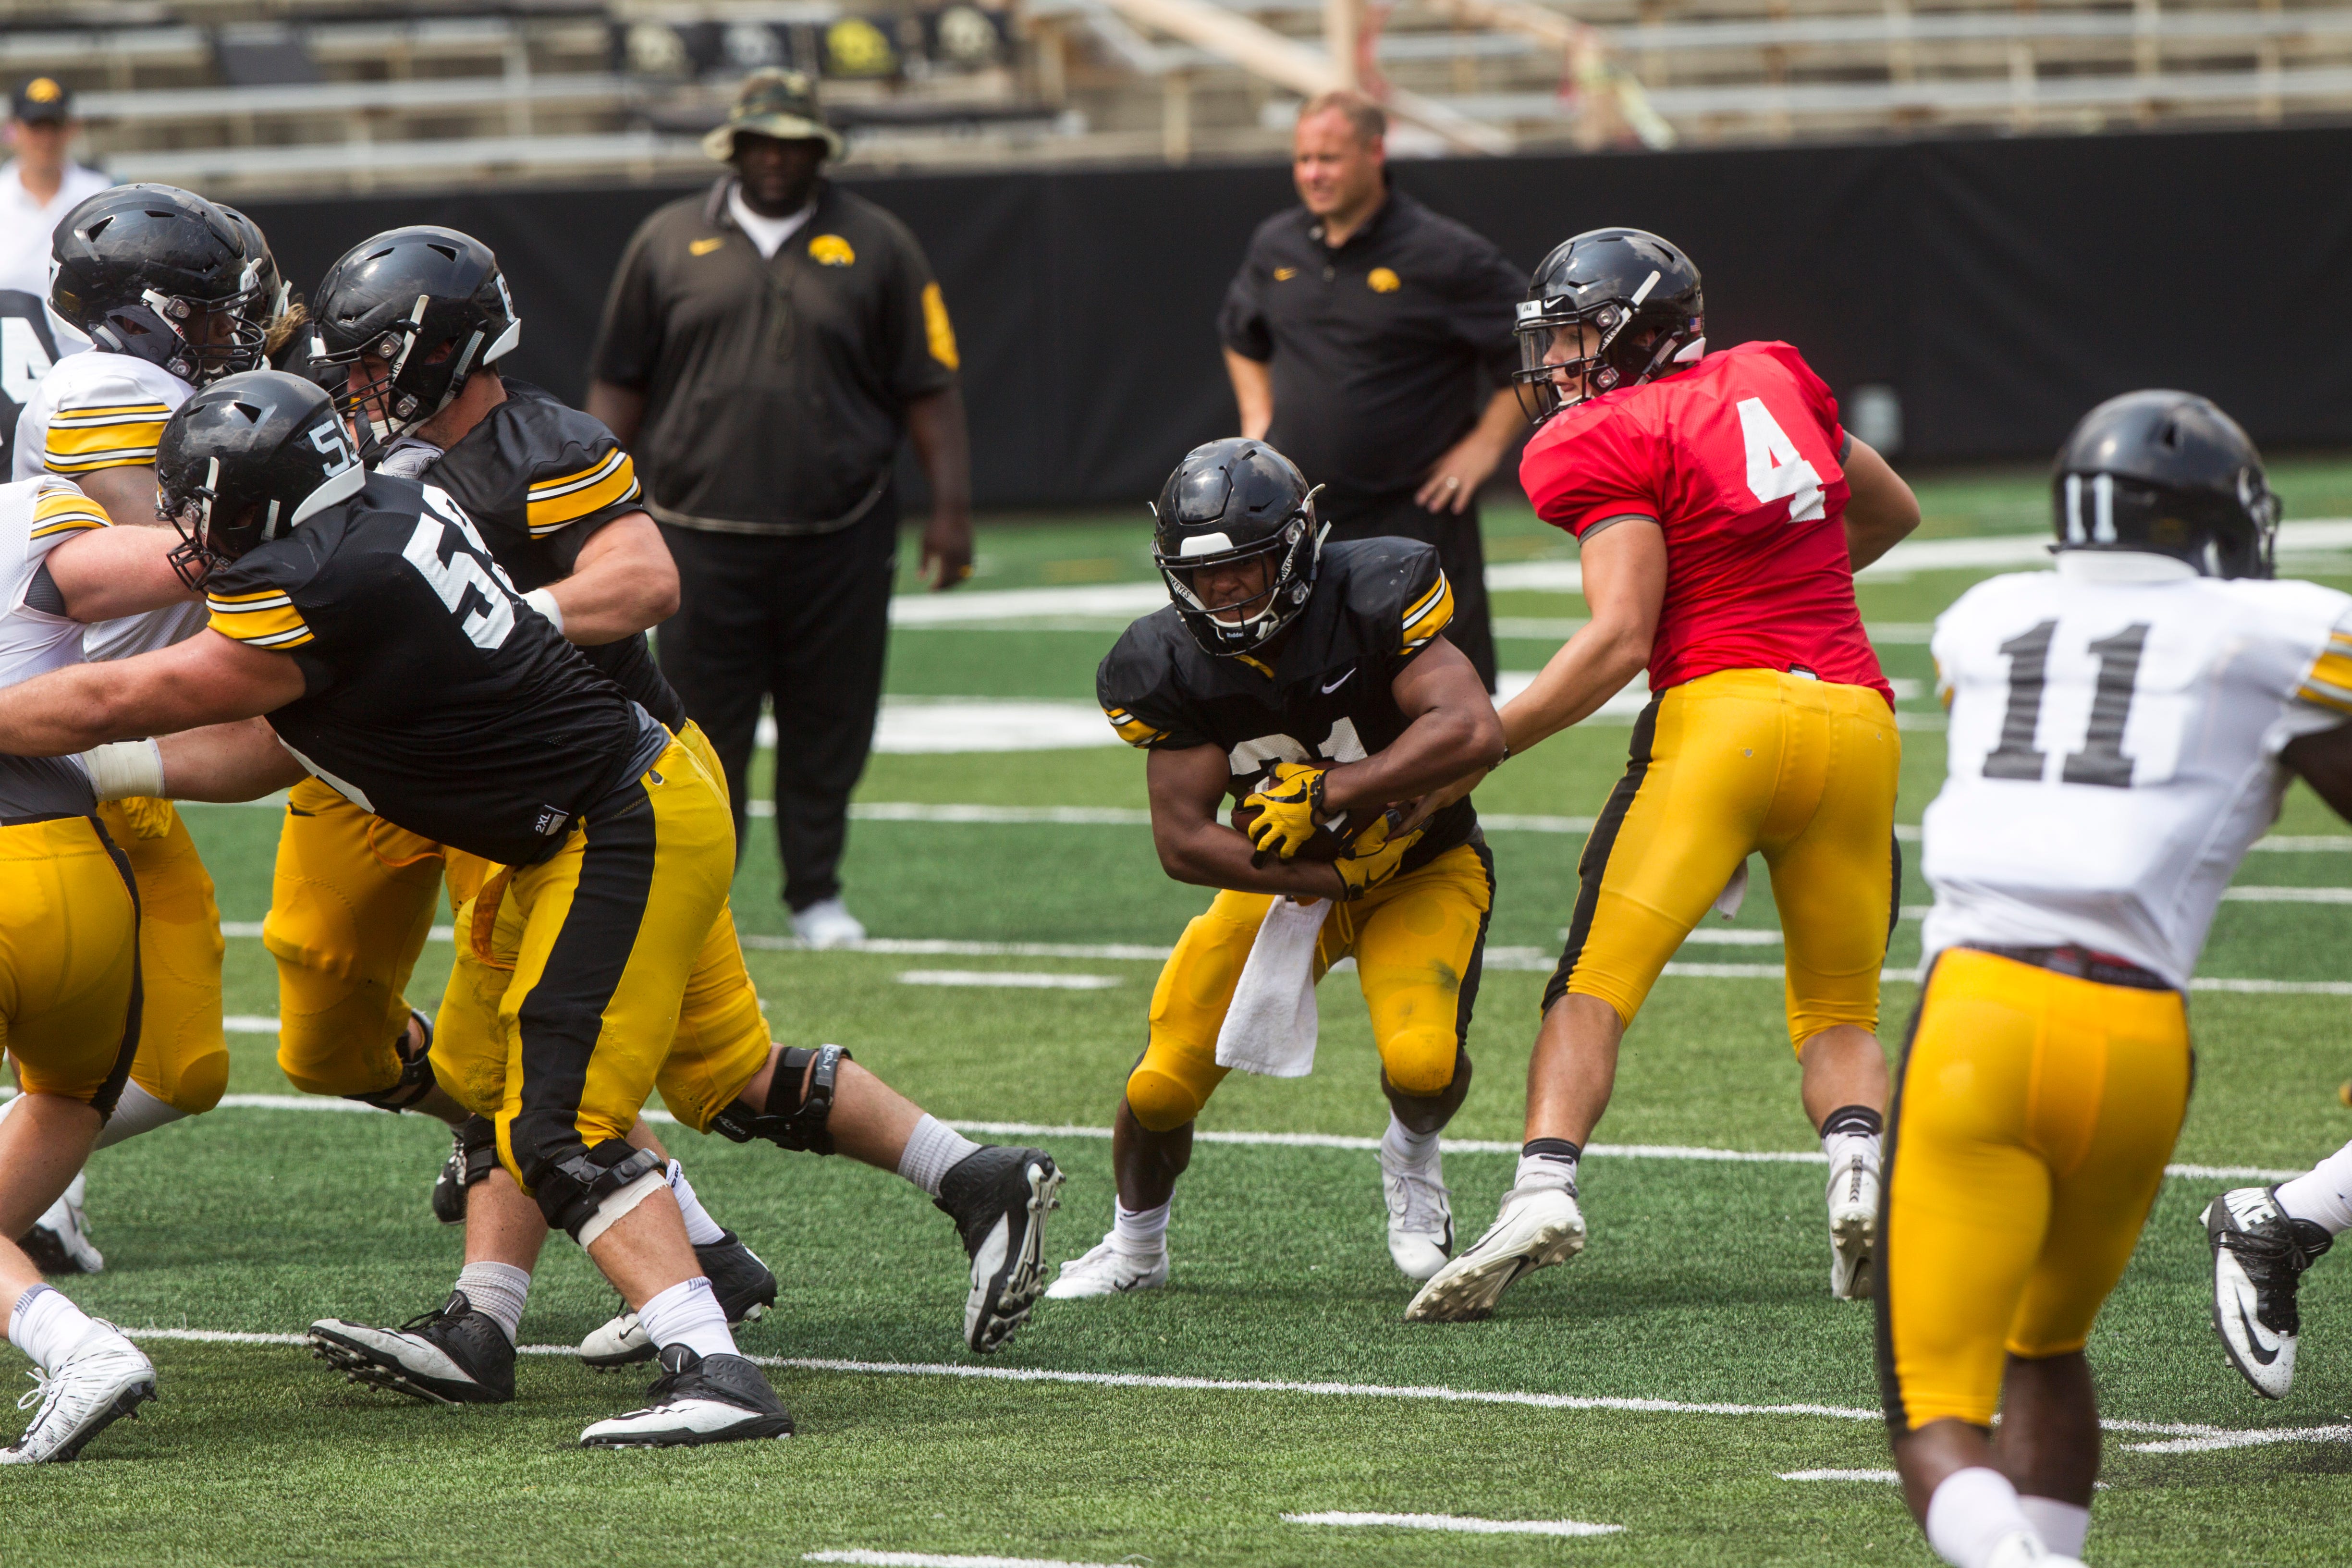 Iowa running back Ivory Kelly-Martin receives a handoff from quarterback Nate Stanley during a Kids Day practice on Saturday, Aug. 11, 2018, at Kinnick Stadium in Iowa City.